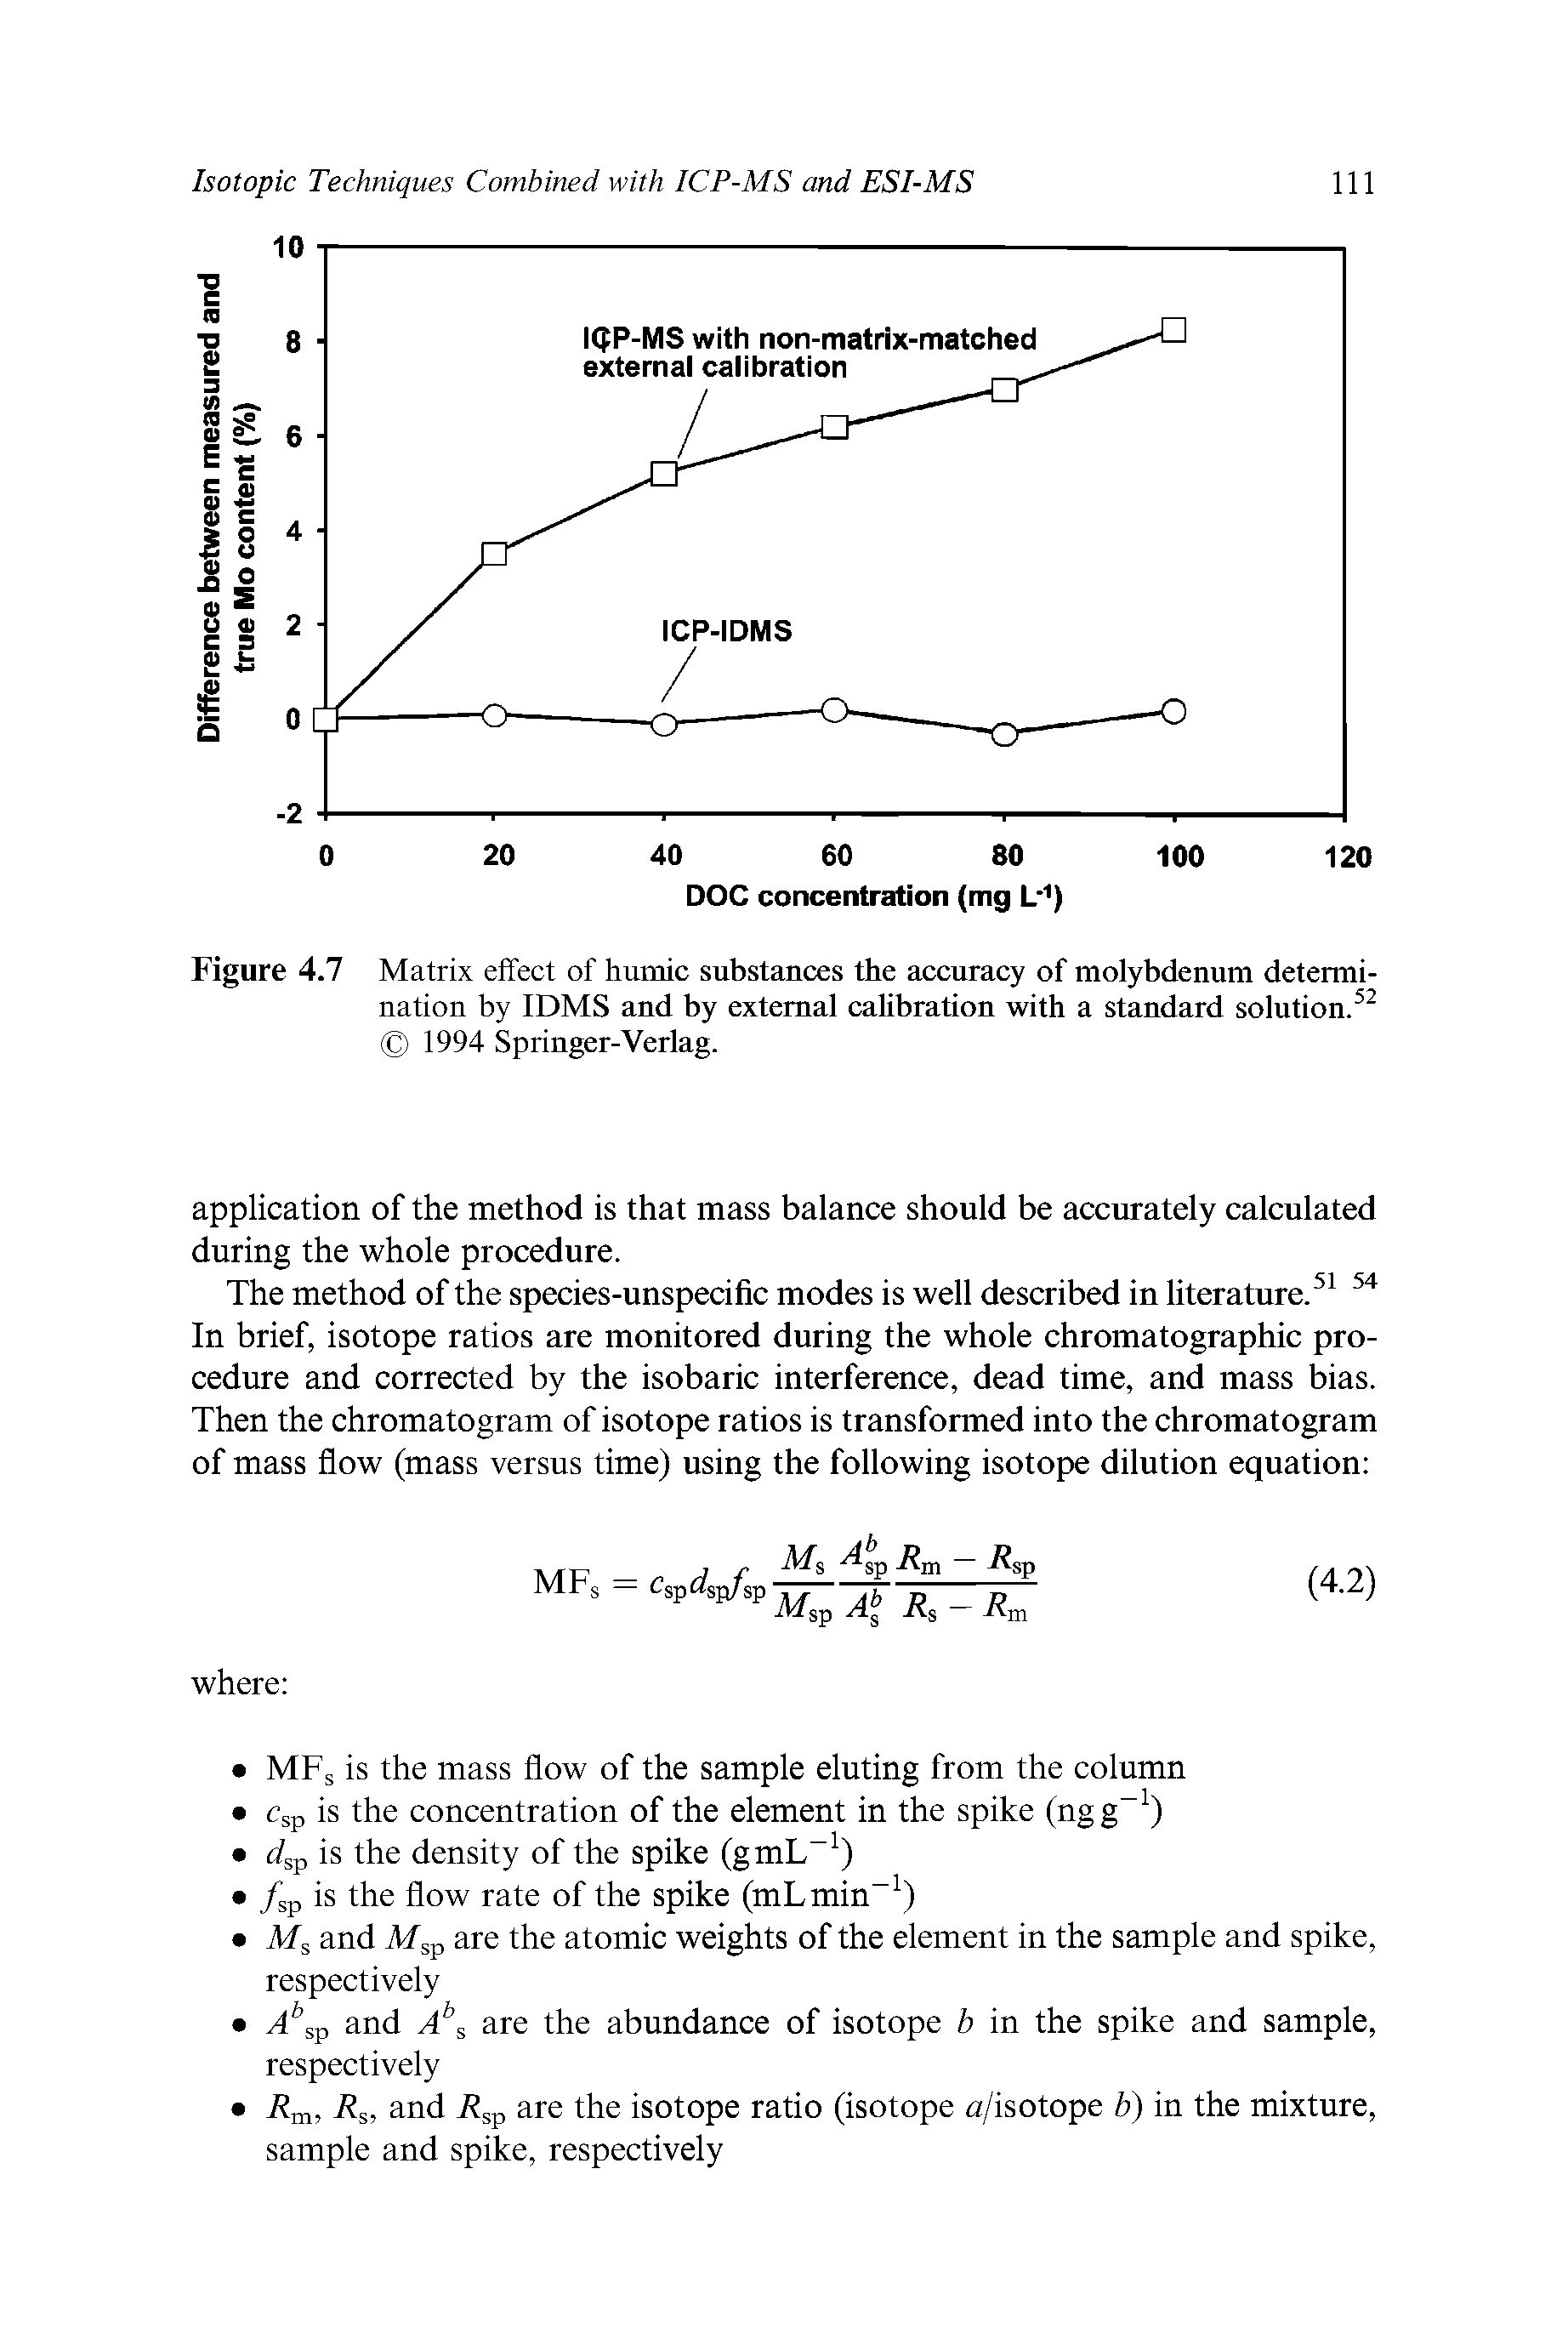 Figure 4.7 Matrix effect of humic substances the accuracy of molybdenum determination by IDMS and by external calibration with a standard solution. 1994 Springer-Verlag.